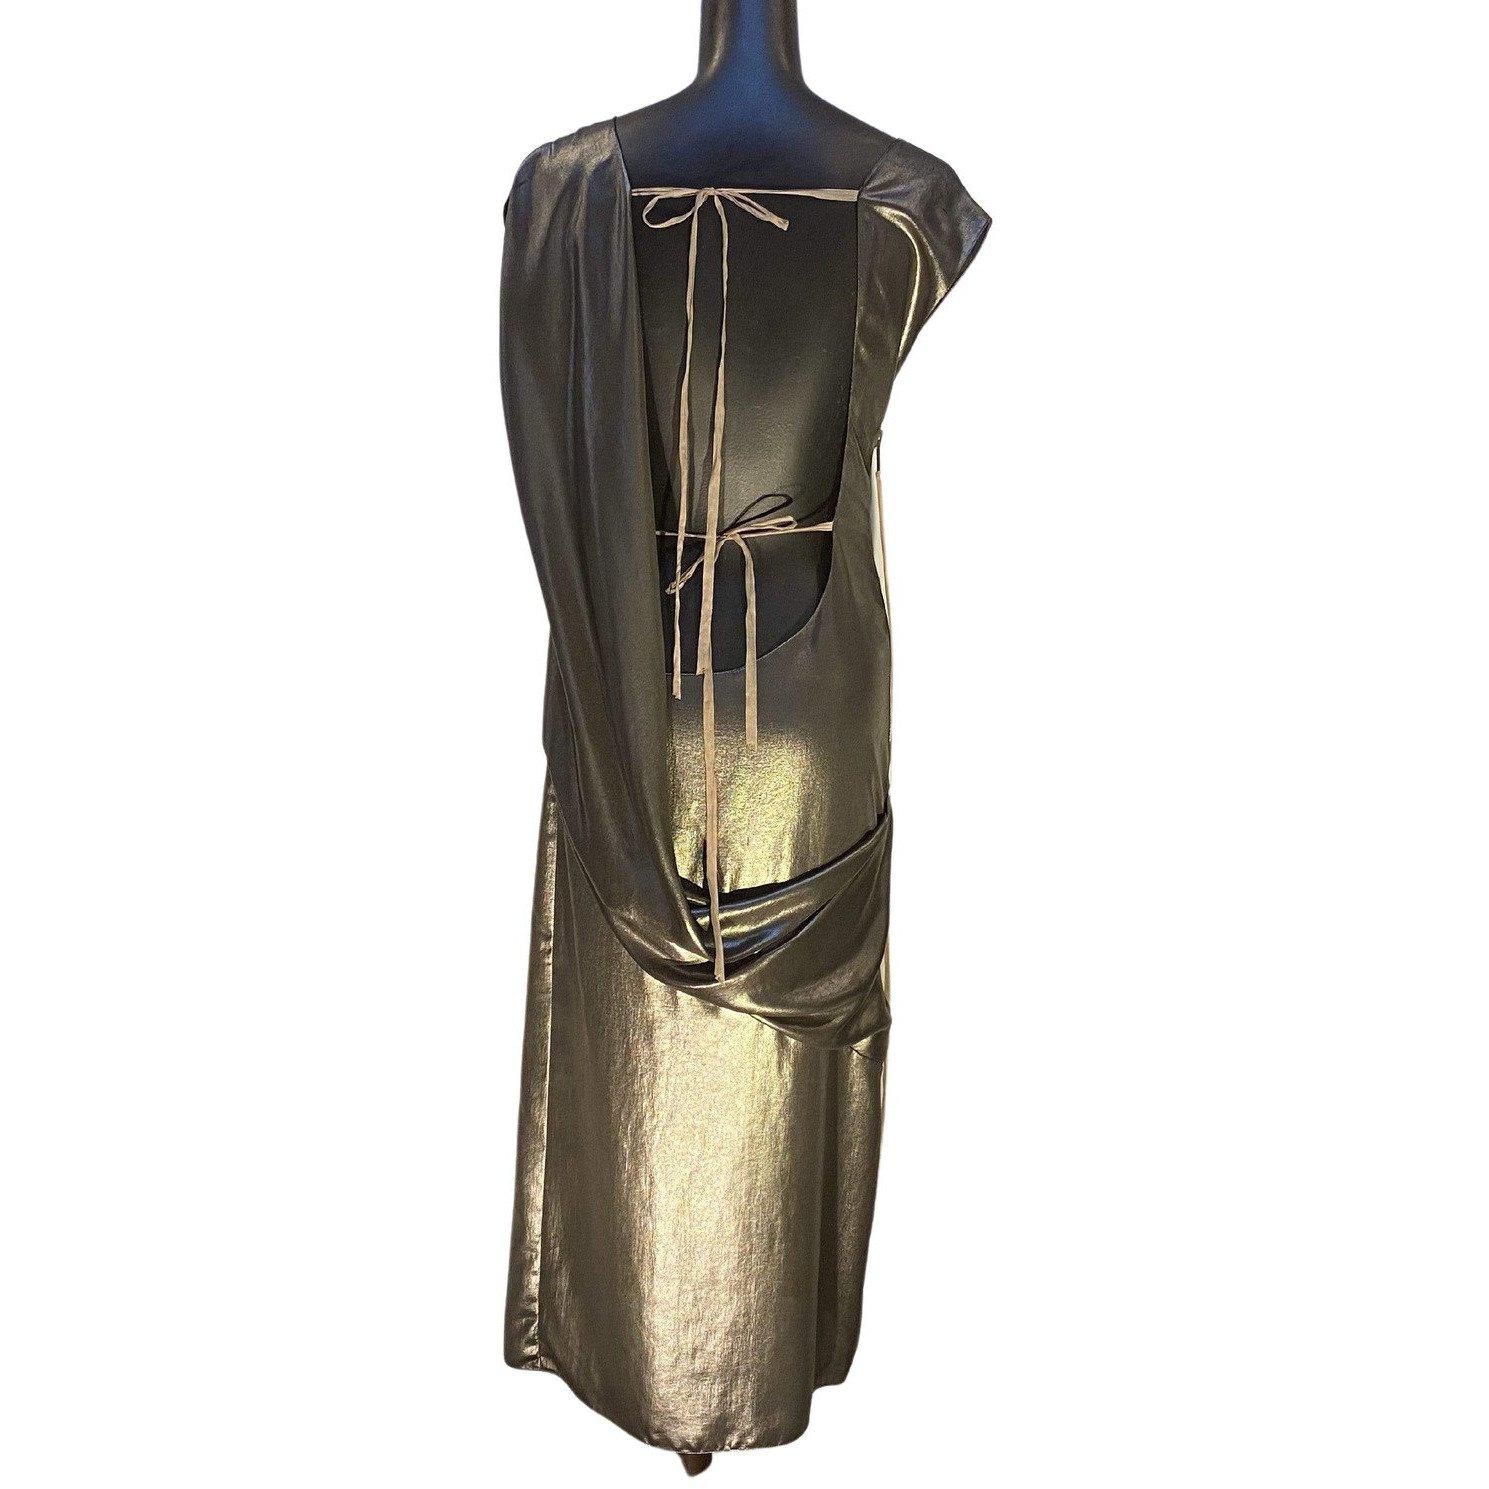 This vintage Thimister gown has a seductively revealing, draped back. It offers a heavy metal zipper with dangling ribbon pull and two more delicate ribbons to tie across the back, securing the shimmery sleeveless dress to the body.